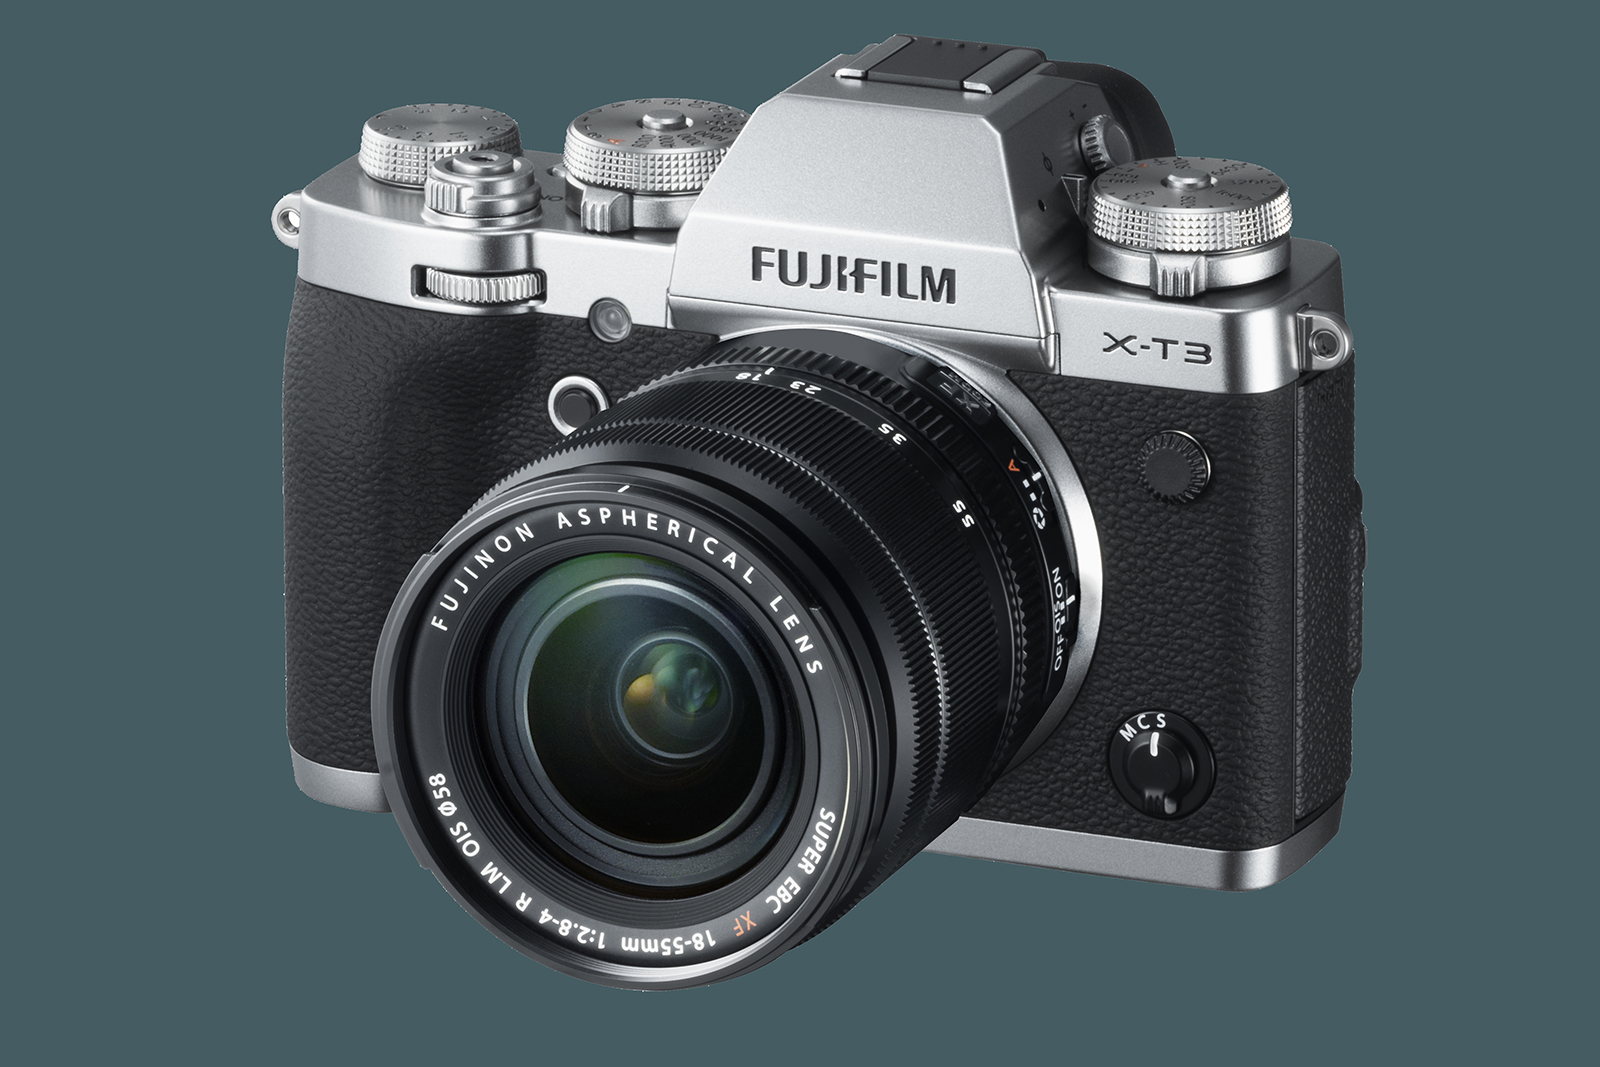 fujifilm unveils x t3 mirrorless camera with new sensor and processor silver leftobl xf18 55mm